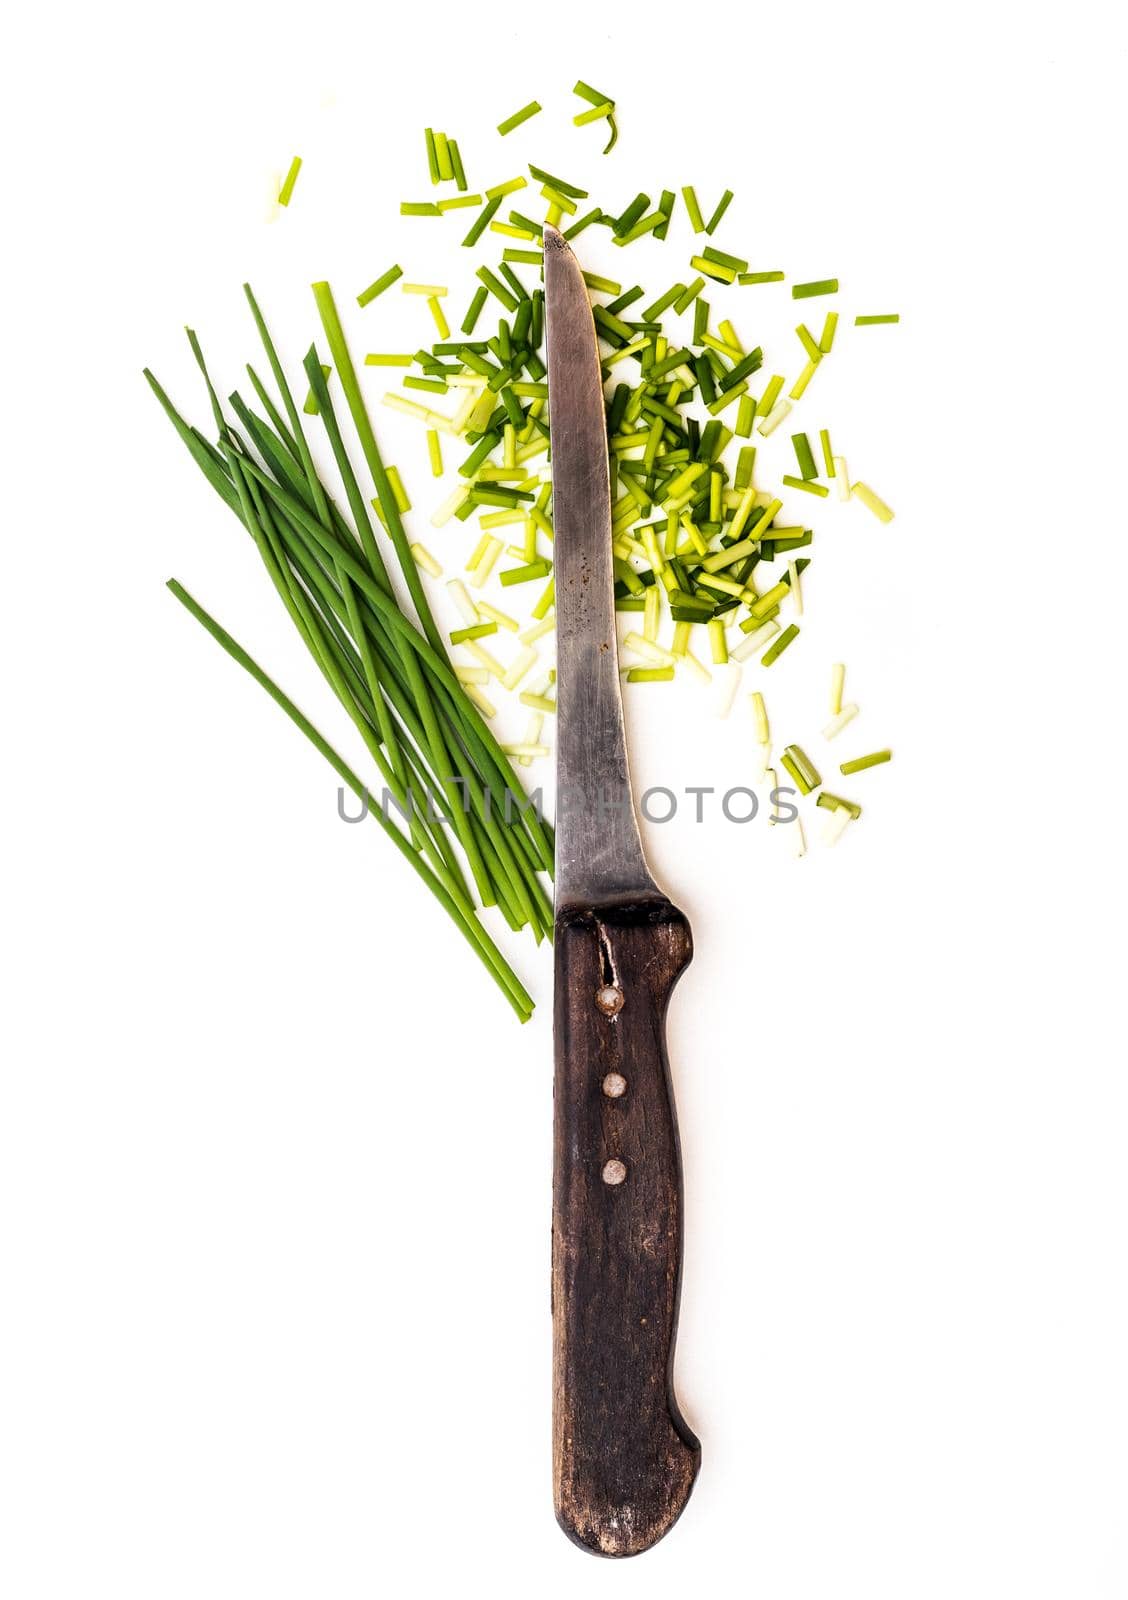 kitchen knife and green onions by GekaSkr